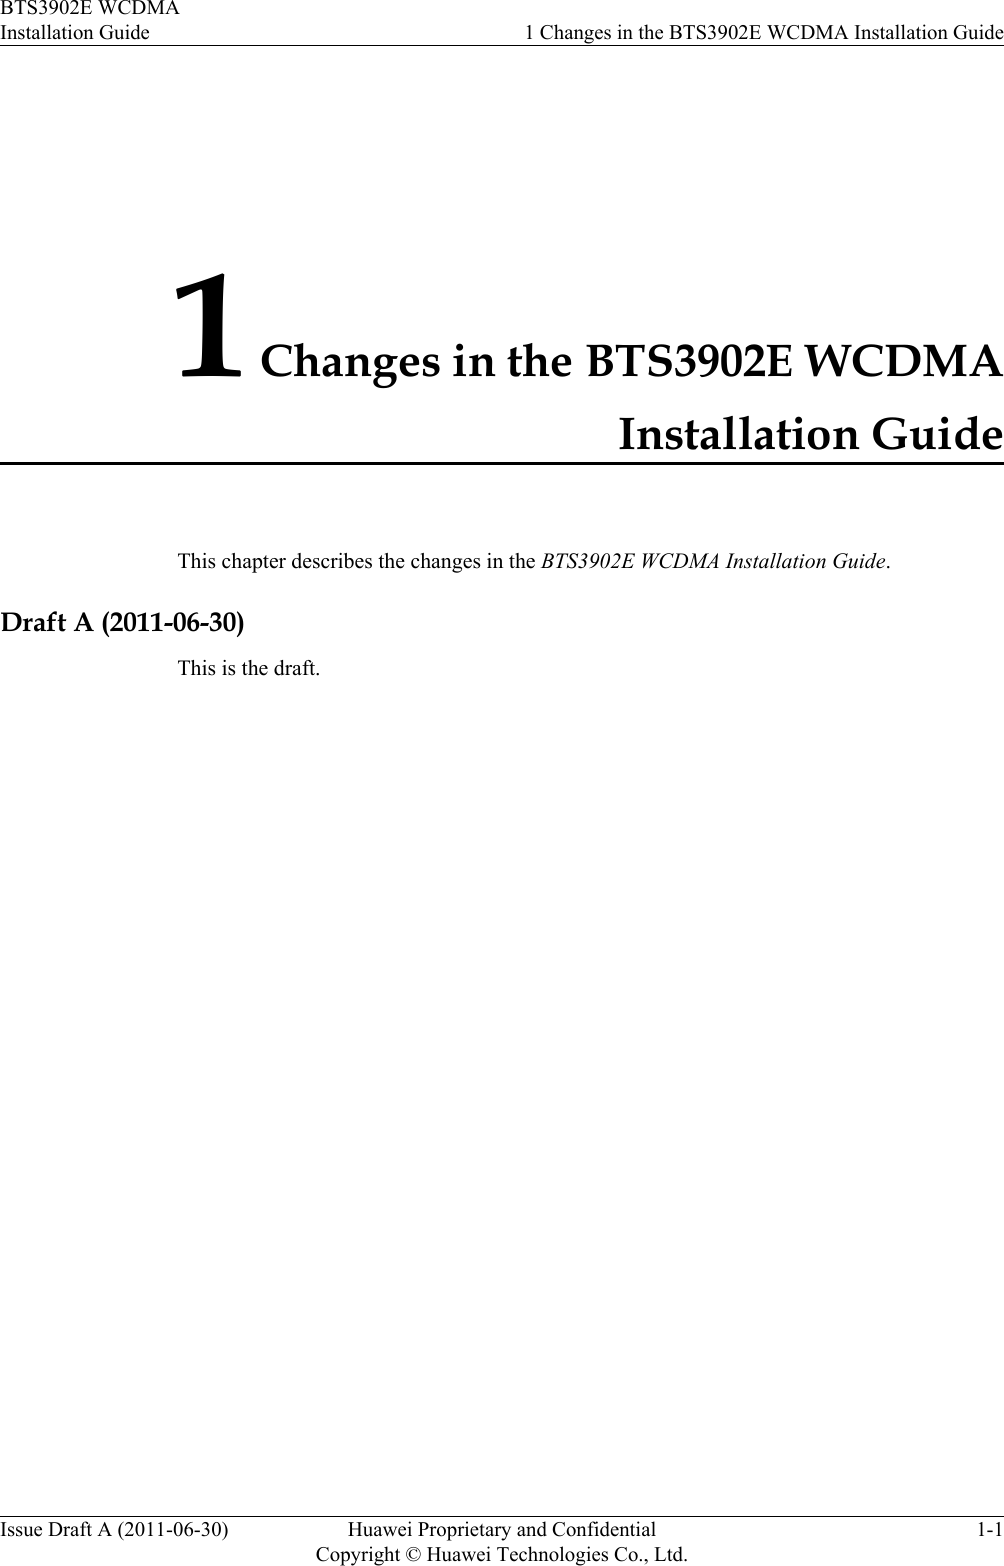 1 Changes in the BTS3902E WCDMAInstallation GuideThis chapter describes the changes in the BTS3902E WCDMA Installation Guide.Draft A (2011-06-30)This is the draft.BTS3902E WCDMAInstallation Guide 1 Changes in the BTS3902E WCDMA Installation GuideIssue Draft A (2011-06-30) Huawei Proprietary and ConfidentialCopyright © Huawei Technologies Co., Ltd.1-1